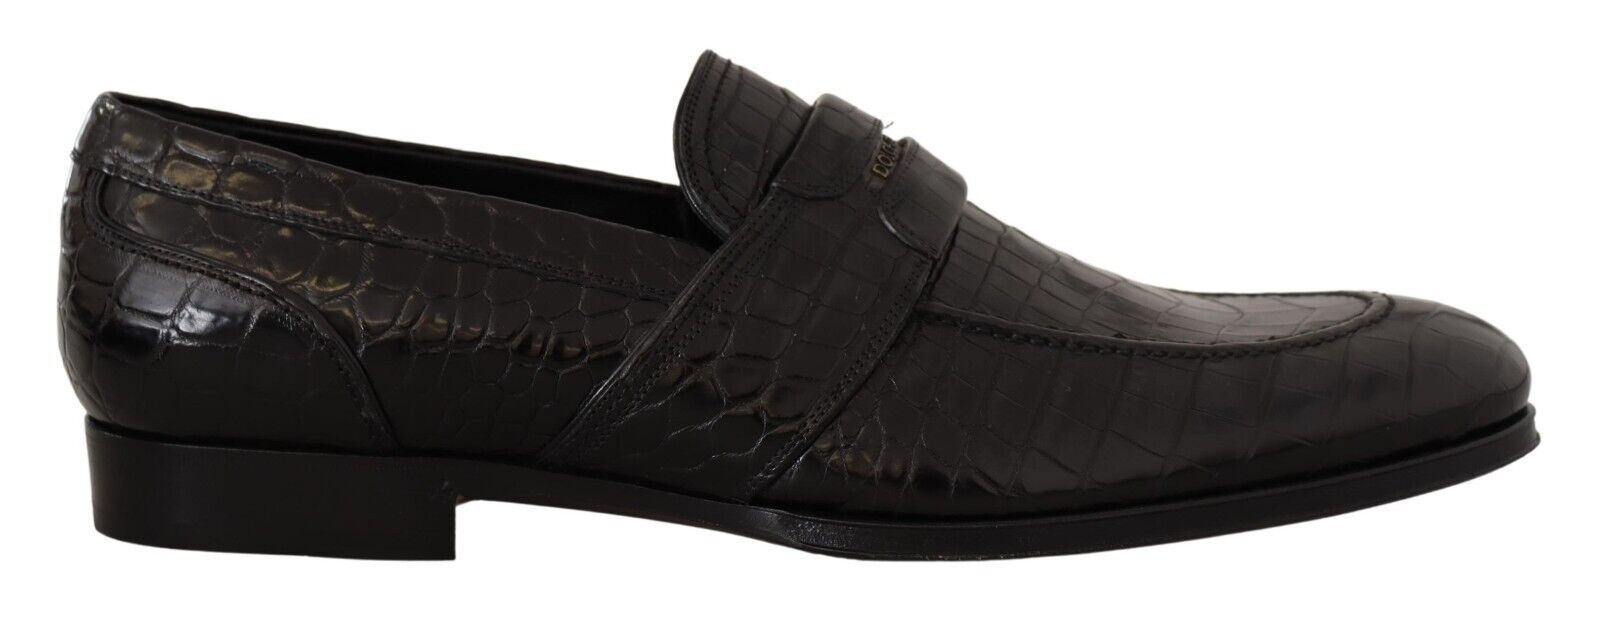 Exquisite  Crocodile Leather Slip-On Moccasin Shoes